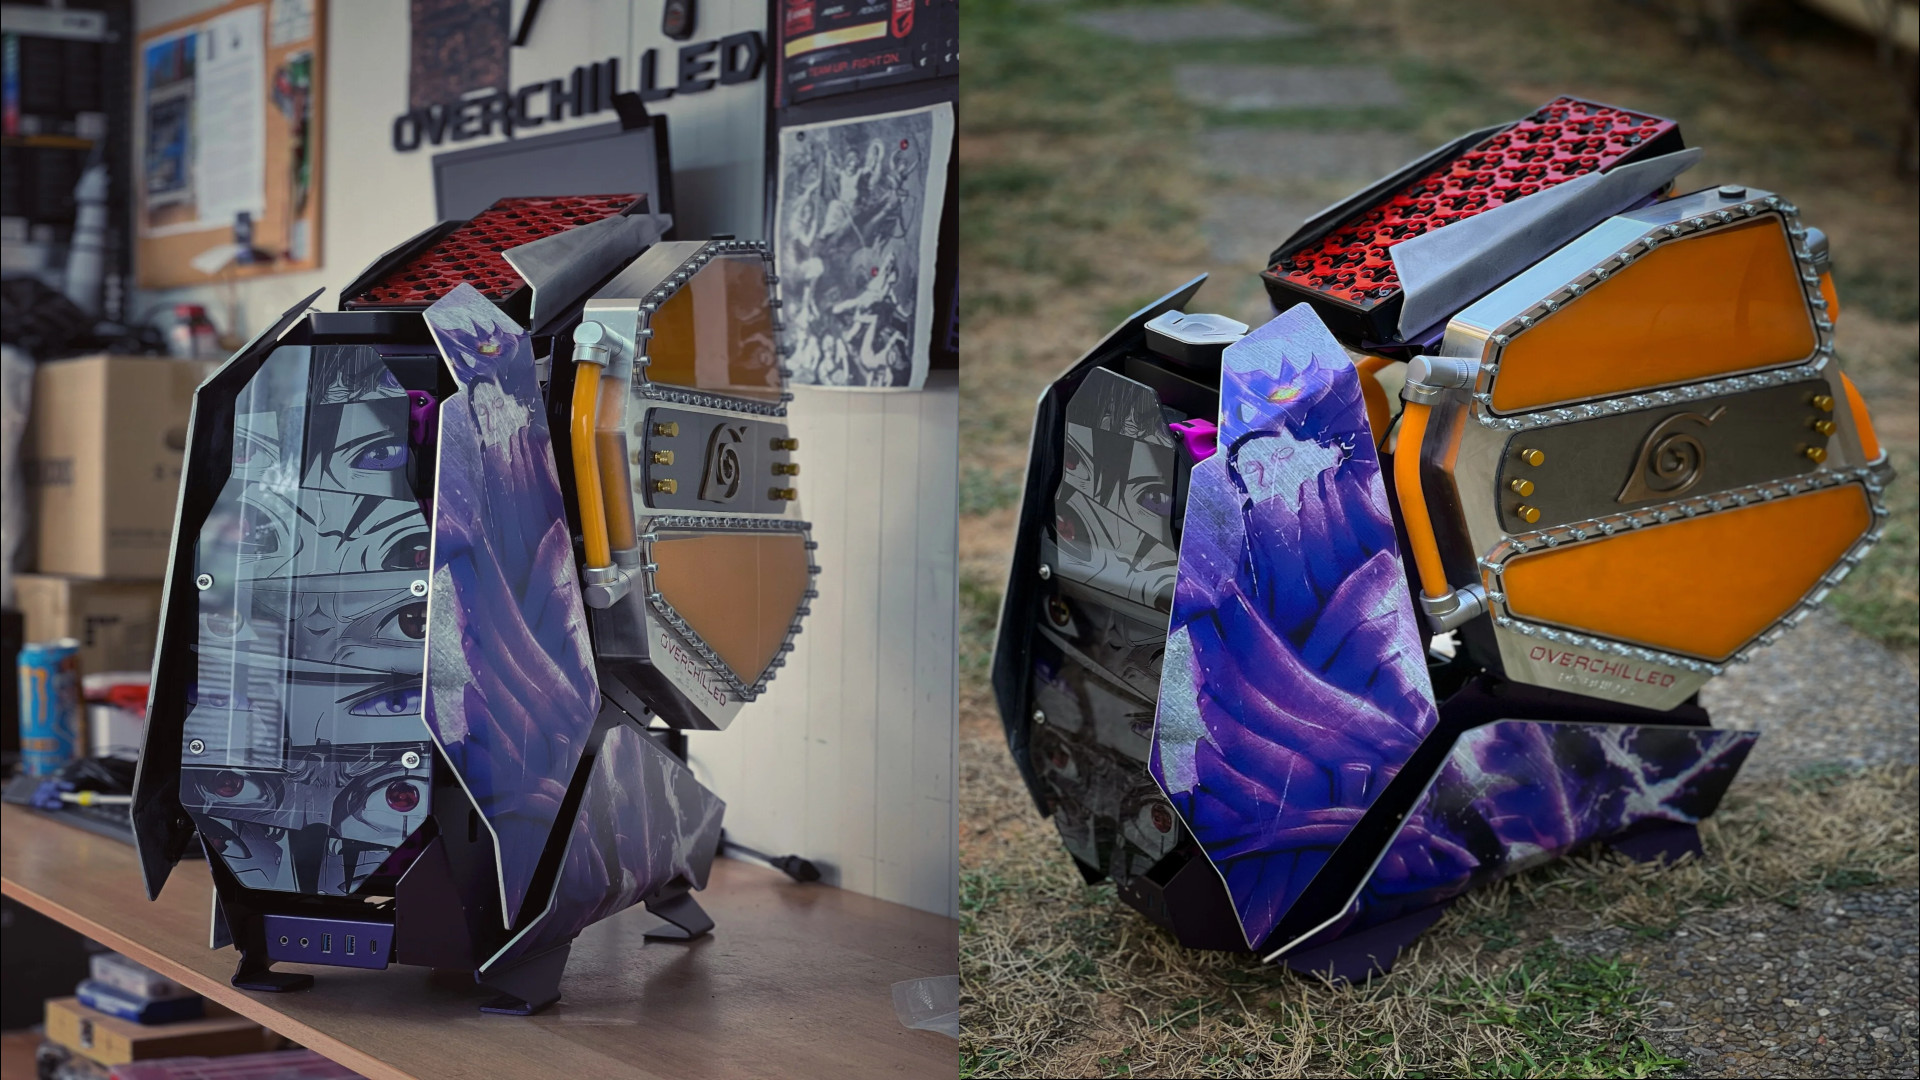 The side by side view of the Naruto gaming PC which is orange and purple